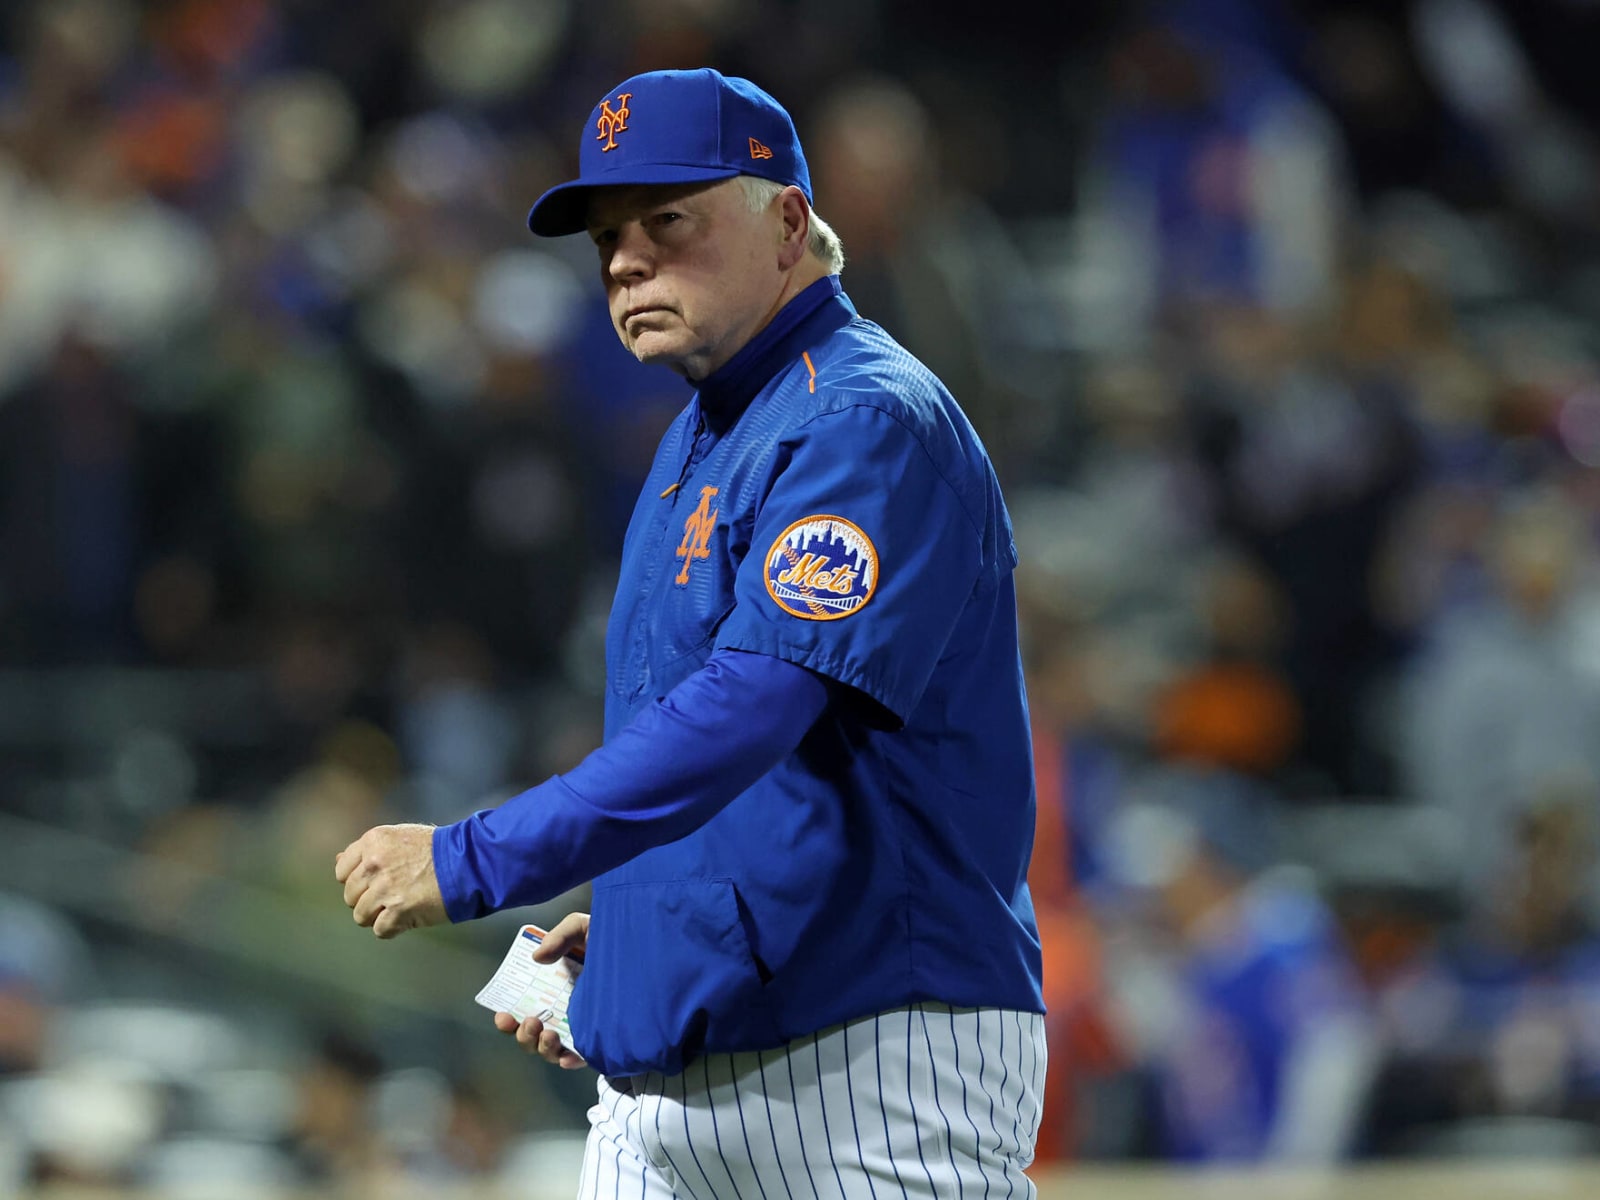 Buck Showalter wanted Mets players to have 'Coming to America' jackets